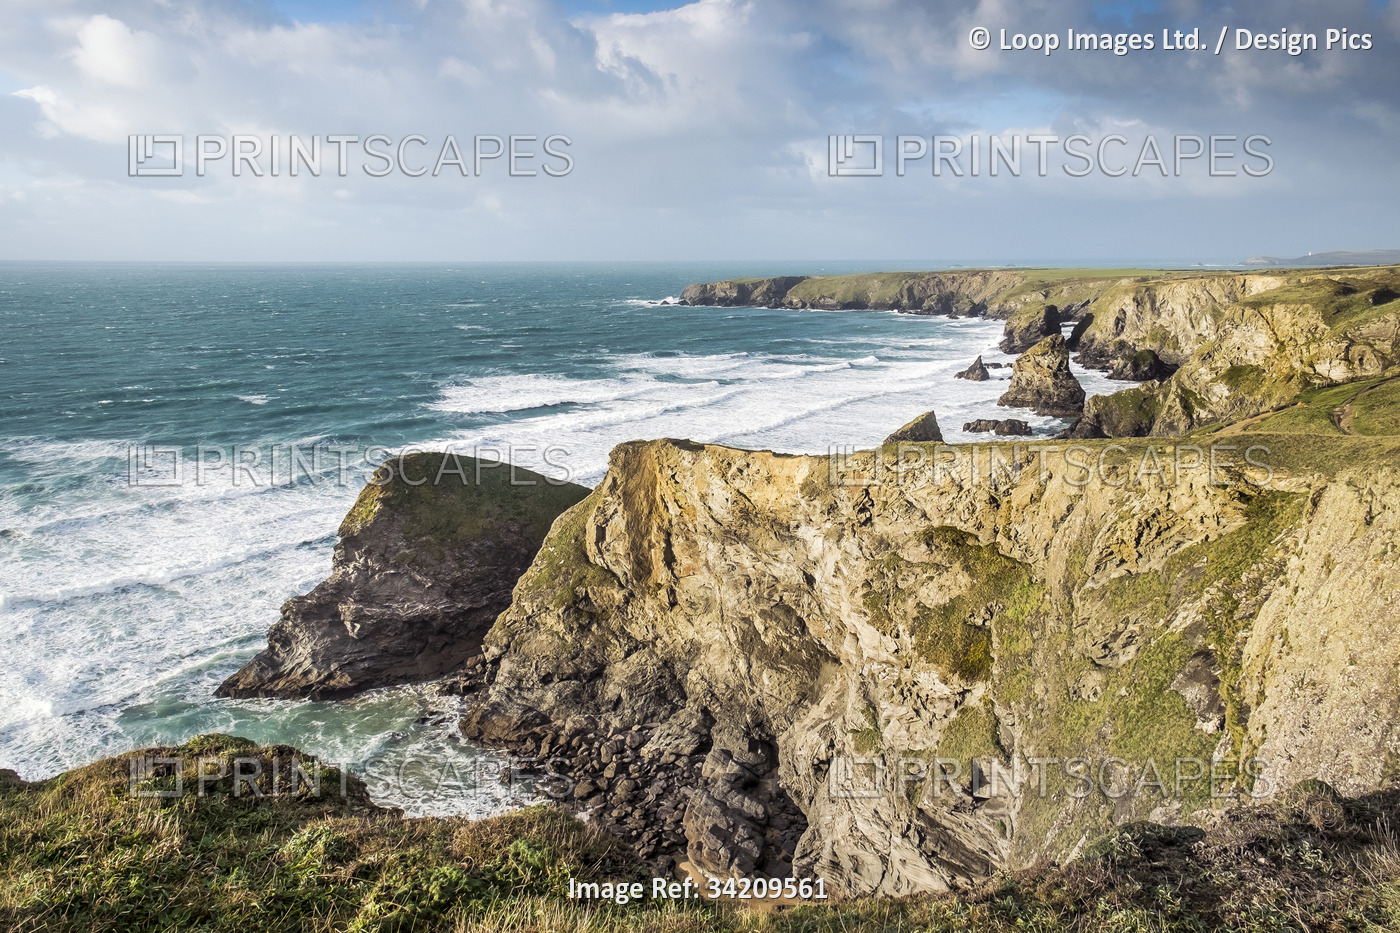 Pendarves Point and Pendarves Island with Bedruthan Steps in the background.